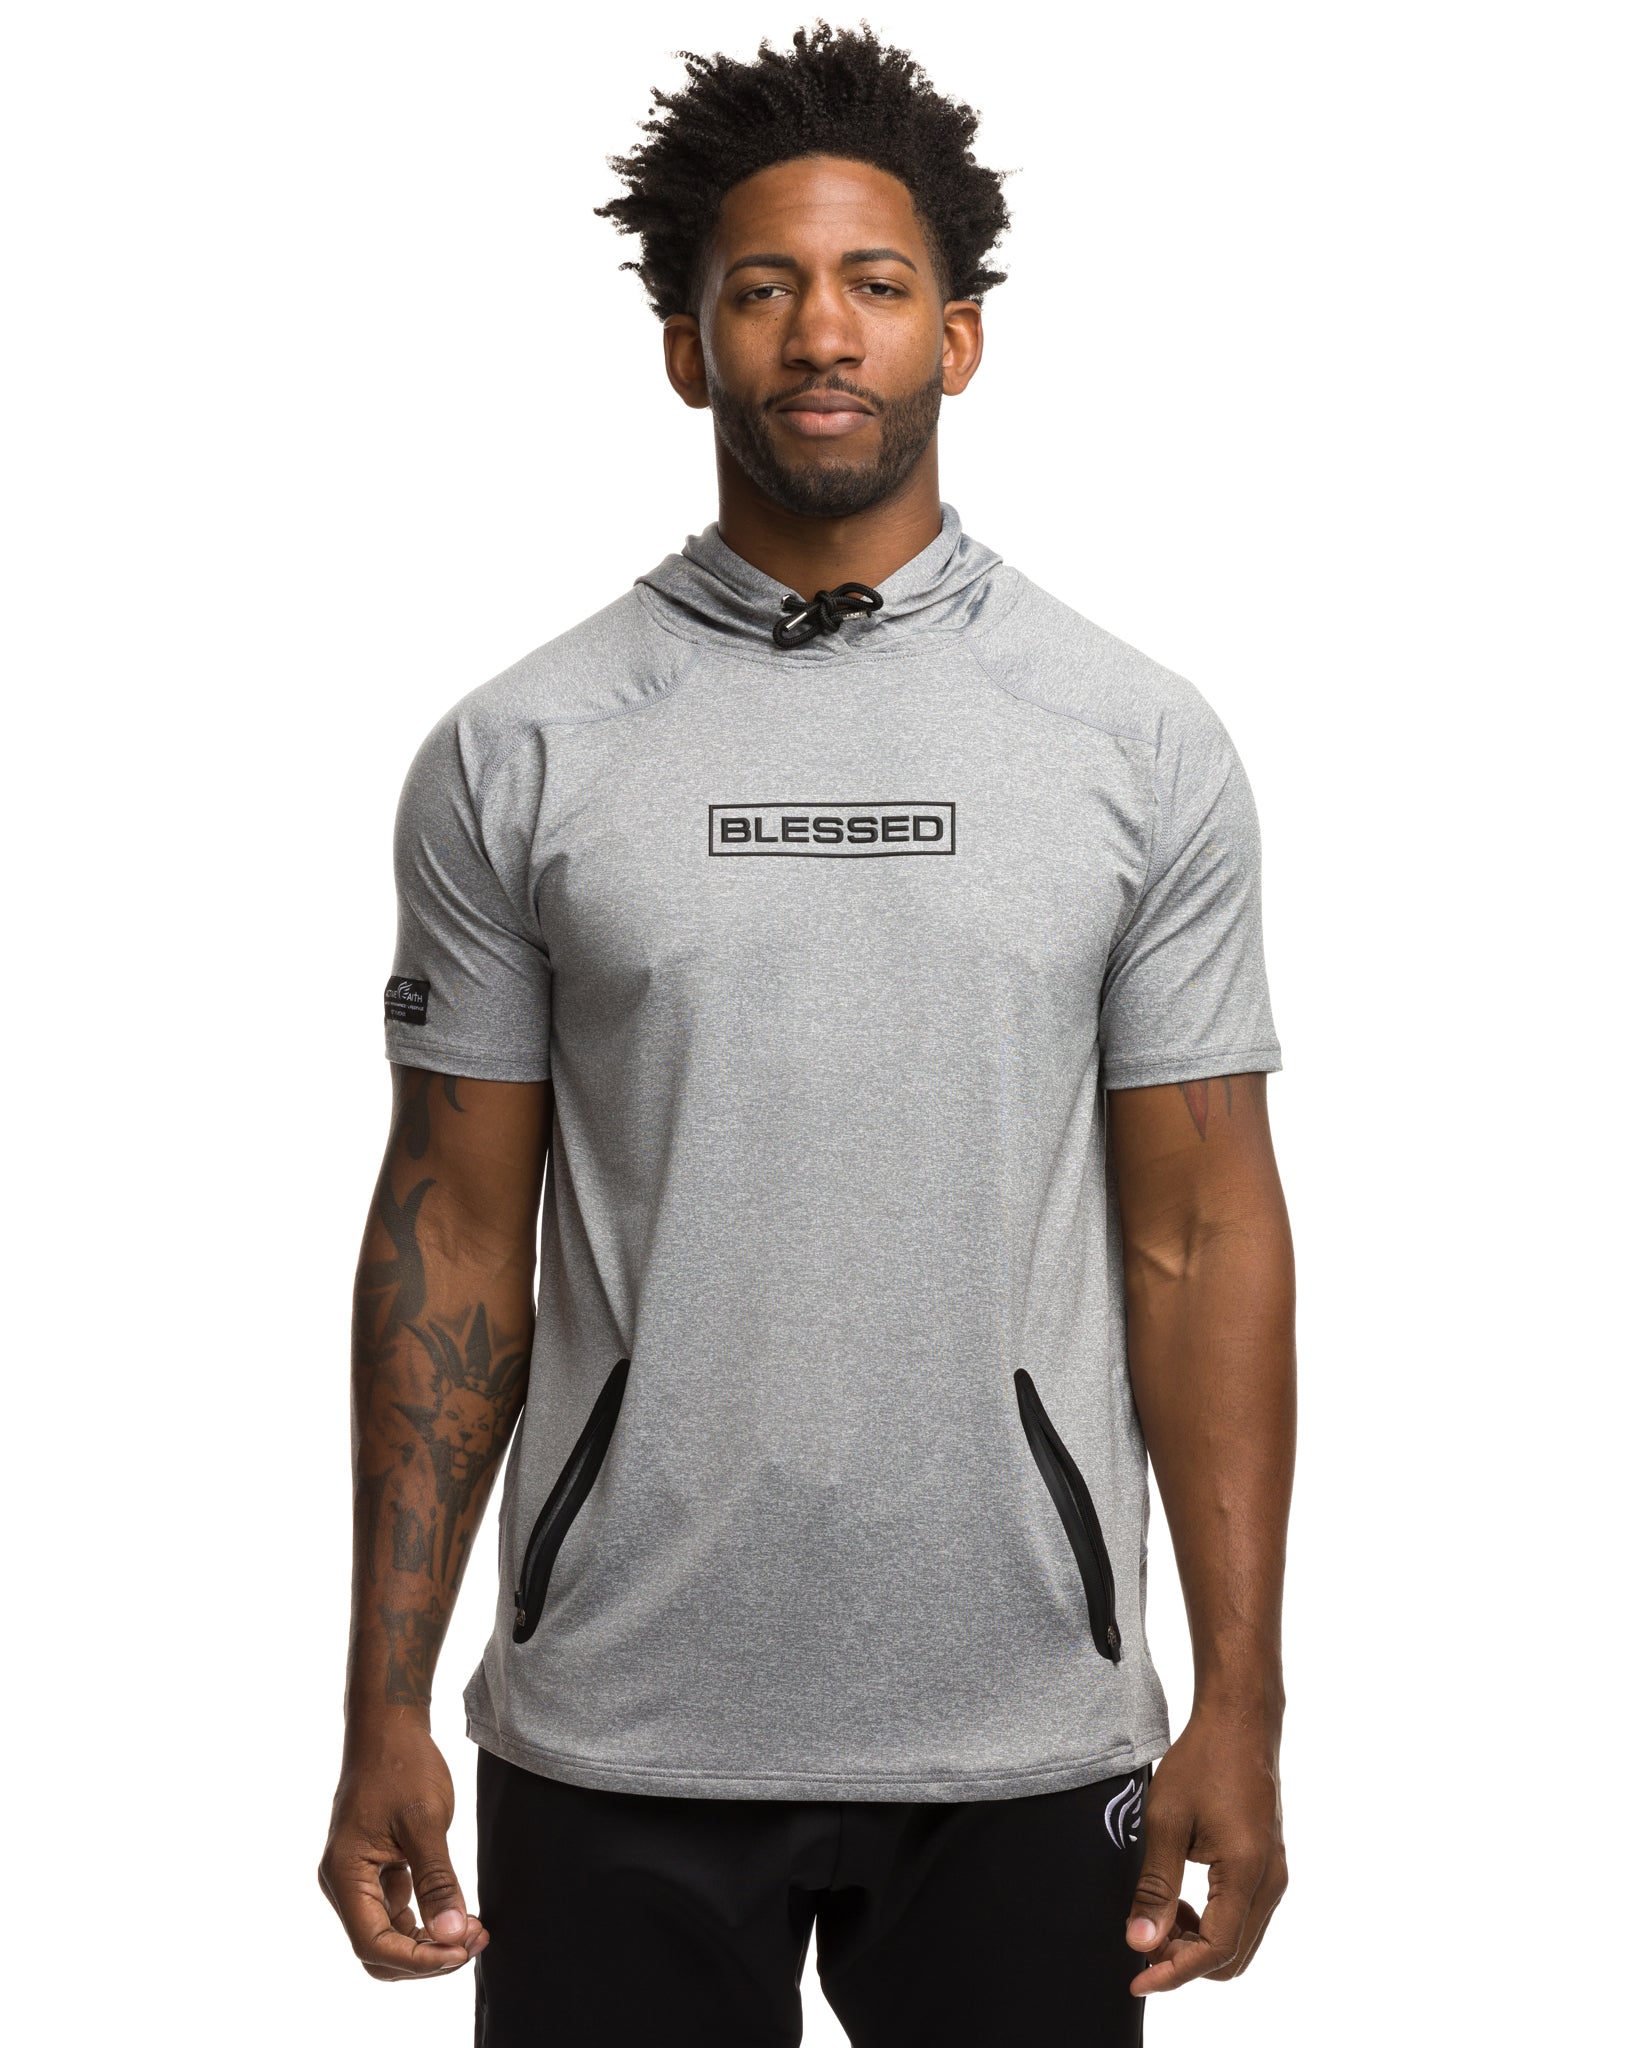 Men's Blessed Performance Tech Short Sleeve Hoodie in Charcoal Black Color